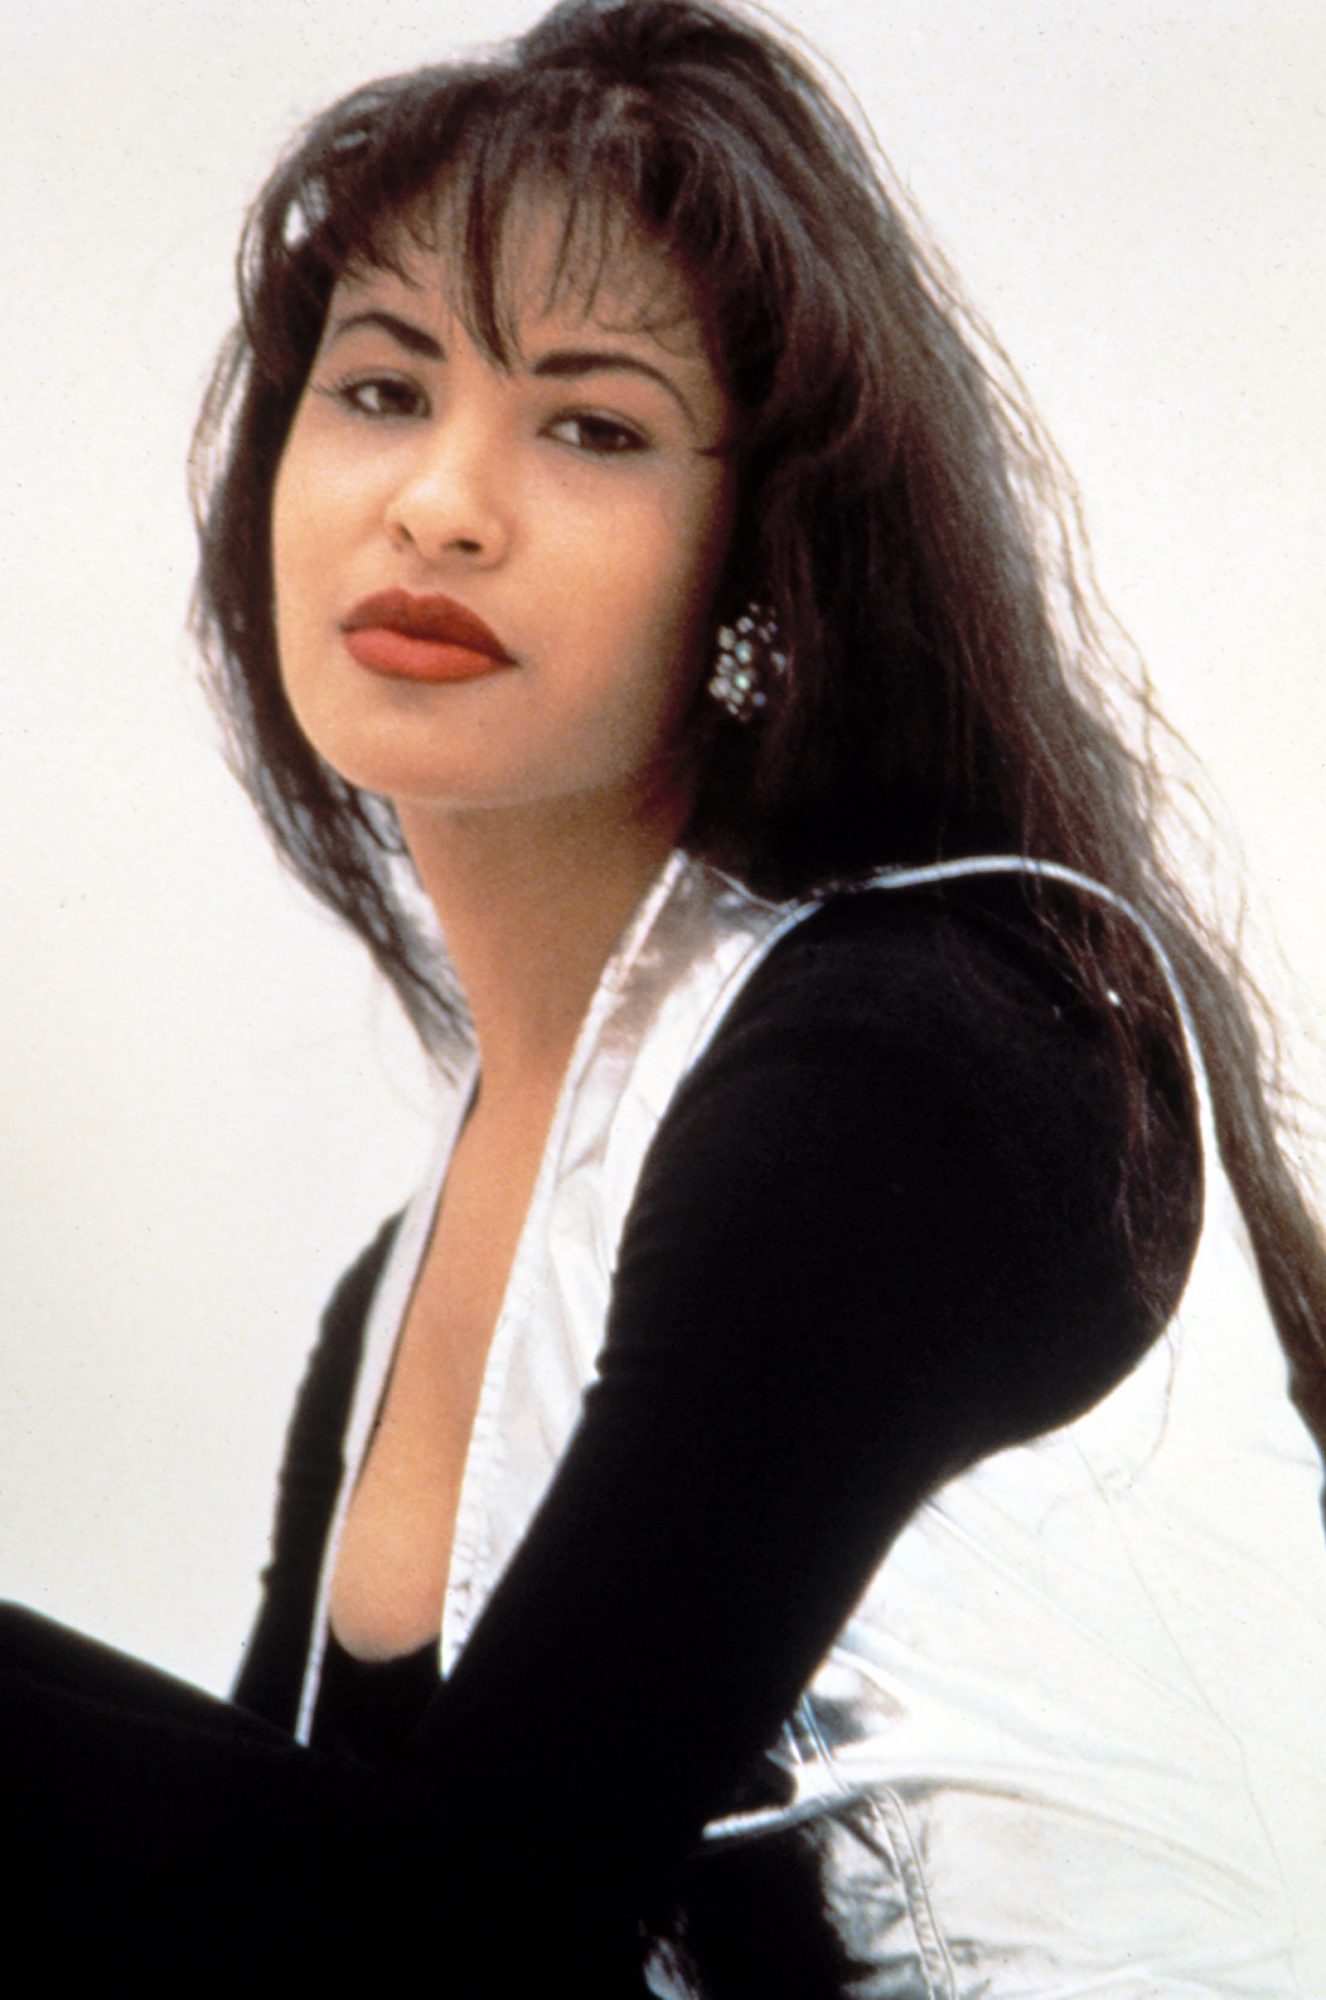 Selena Quintanilla-Pérez's Family Remembers Her 'Life and Legacy' 26 Years After Late Star's Death